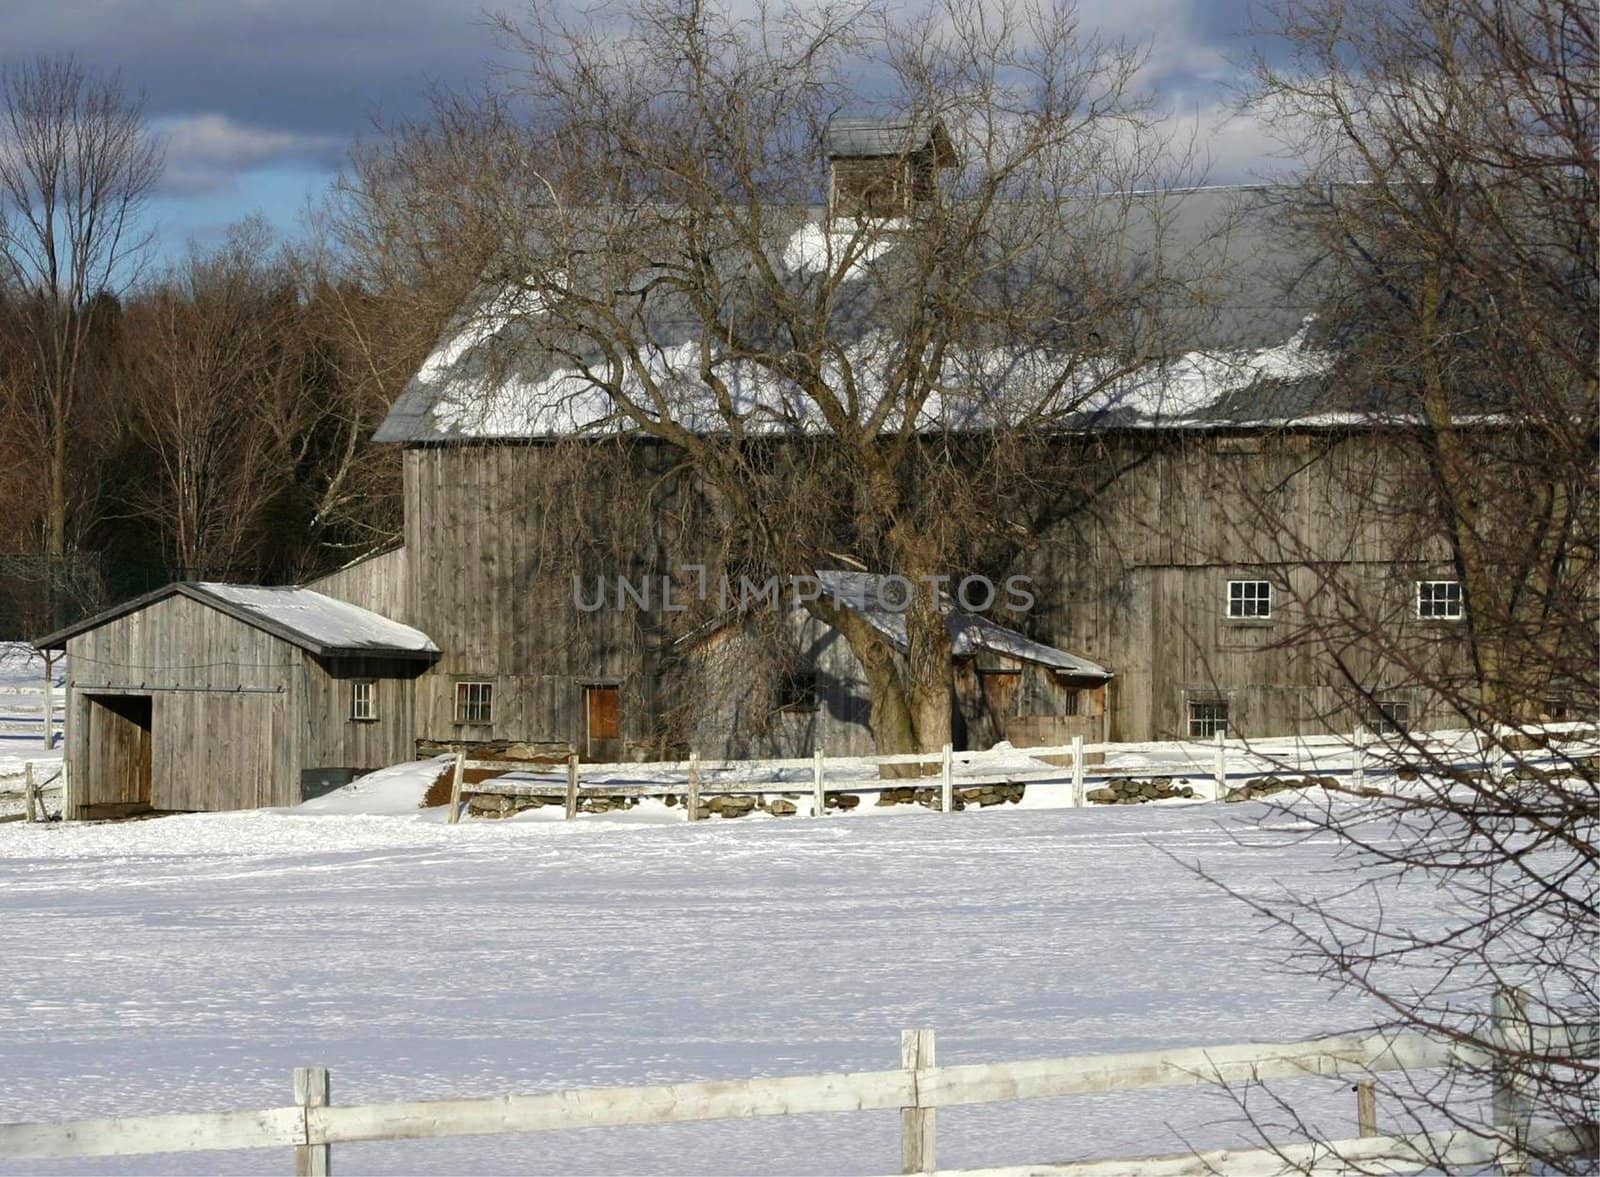 View of a barn surrounded by with winter fields